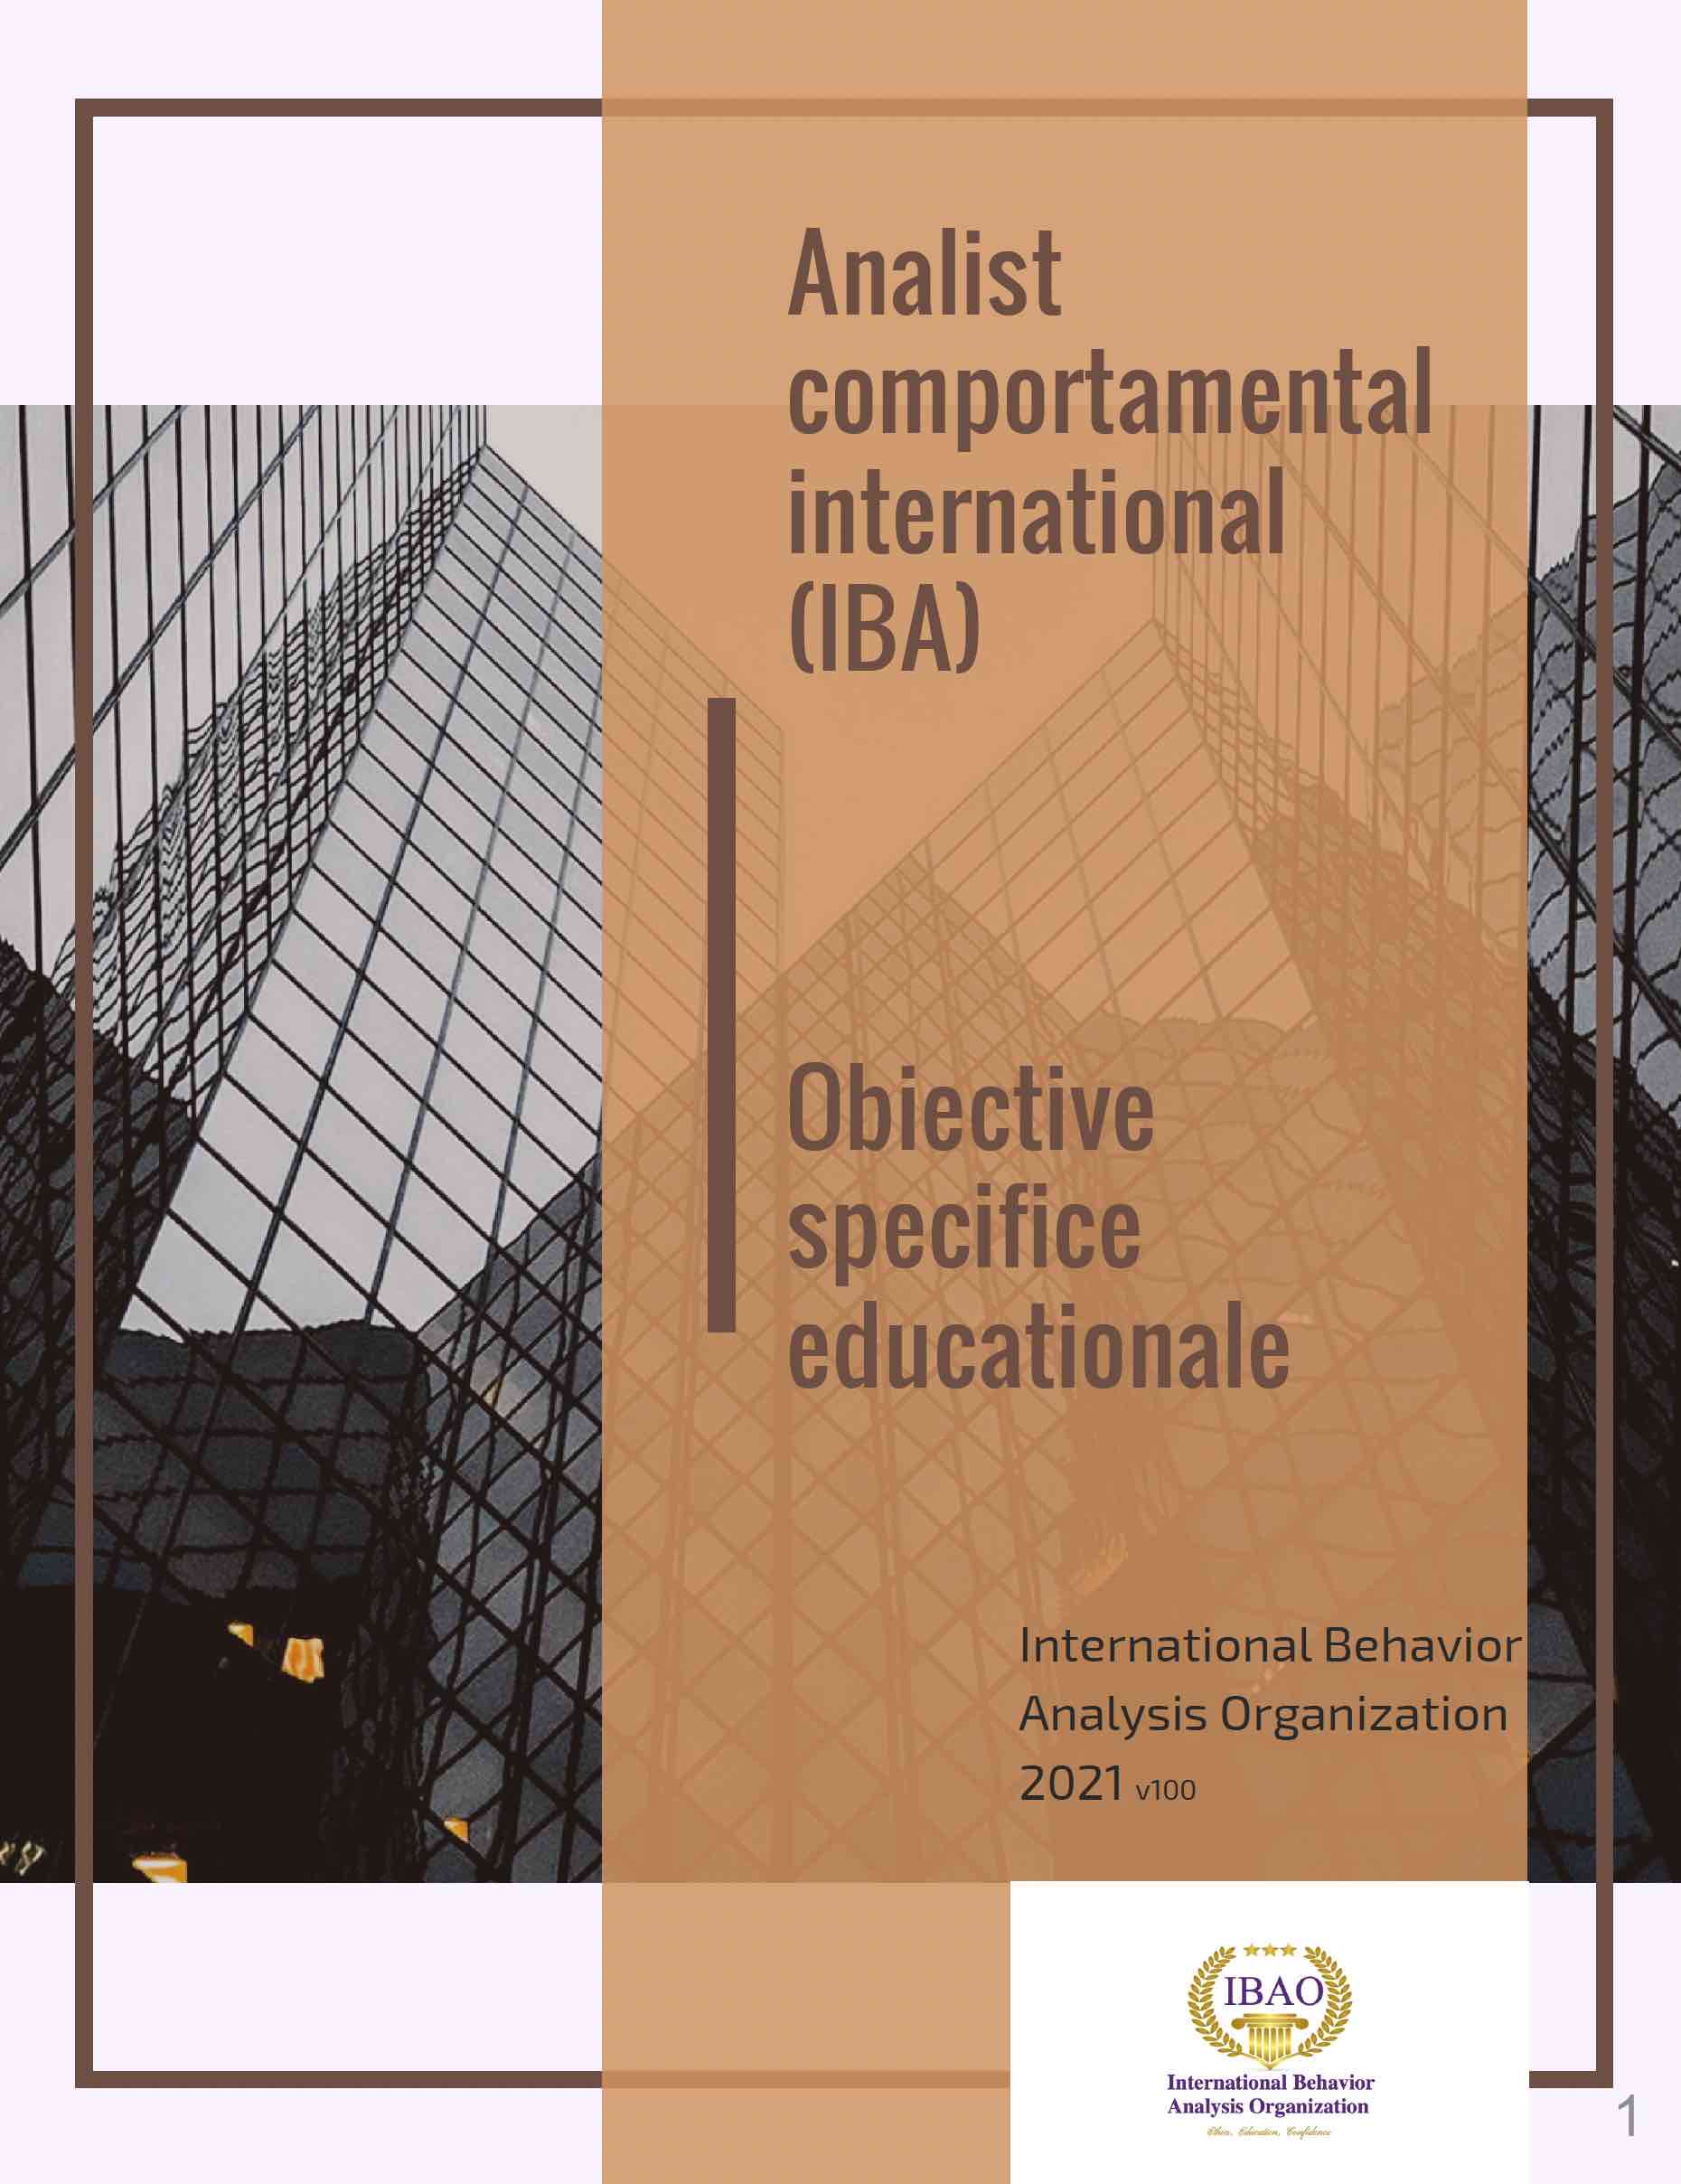 IBA® Required Educational Objectives